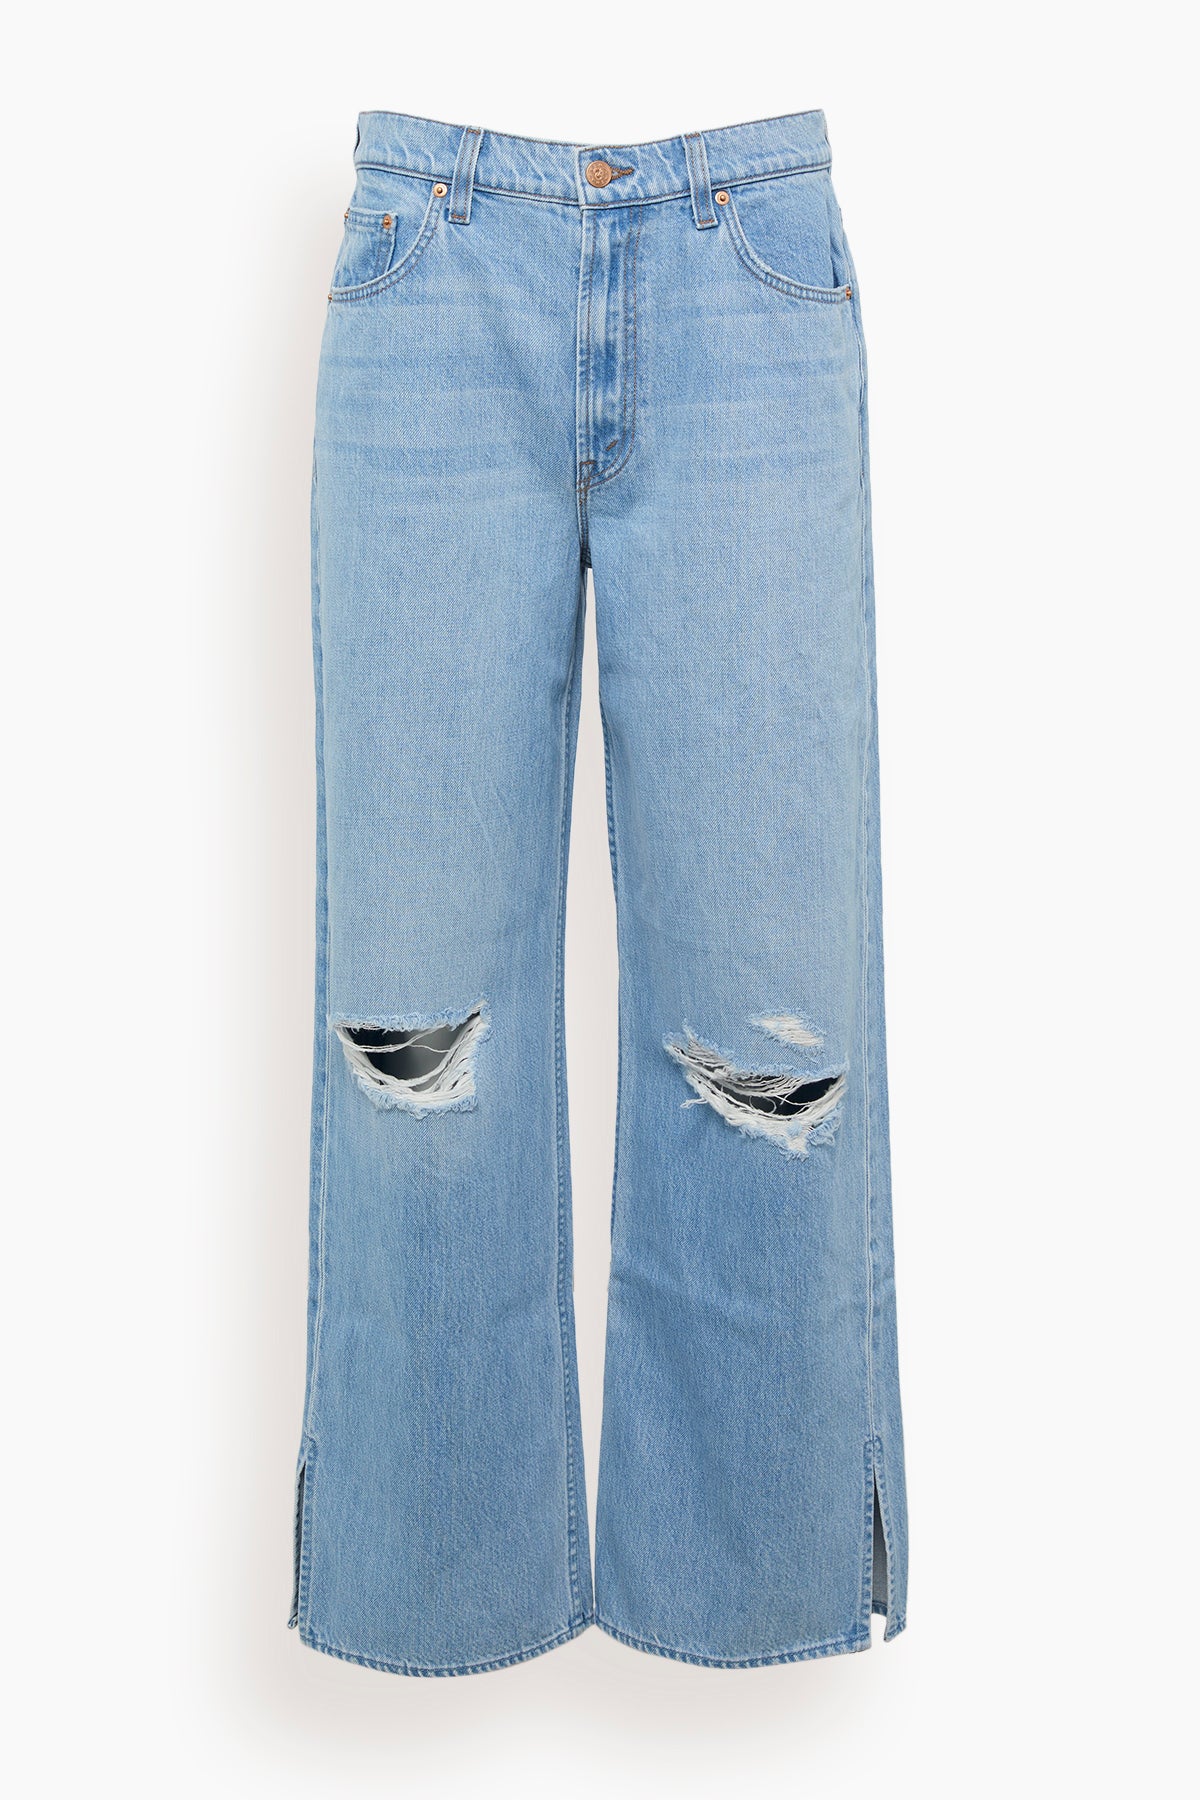 The Fun Dip Puddle Slice Jean in Lots of Nibbles